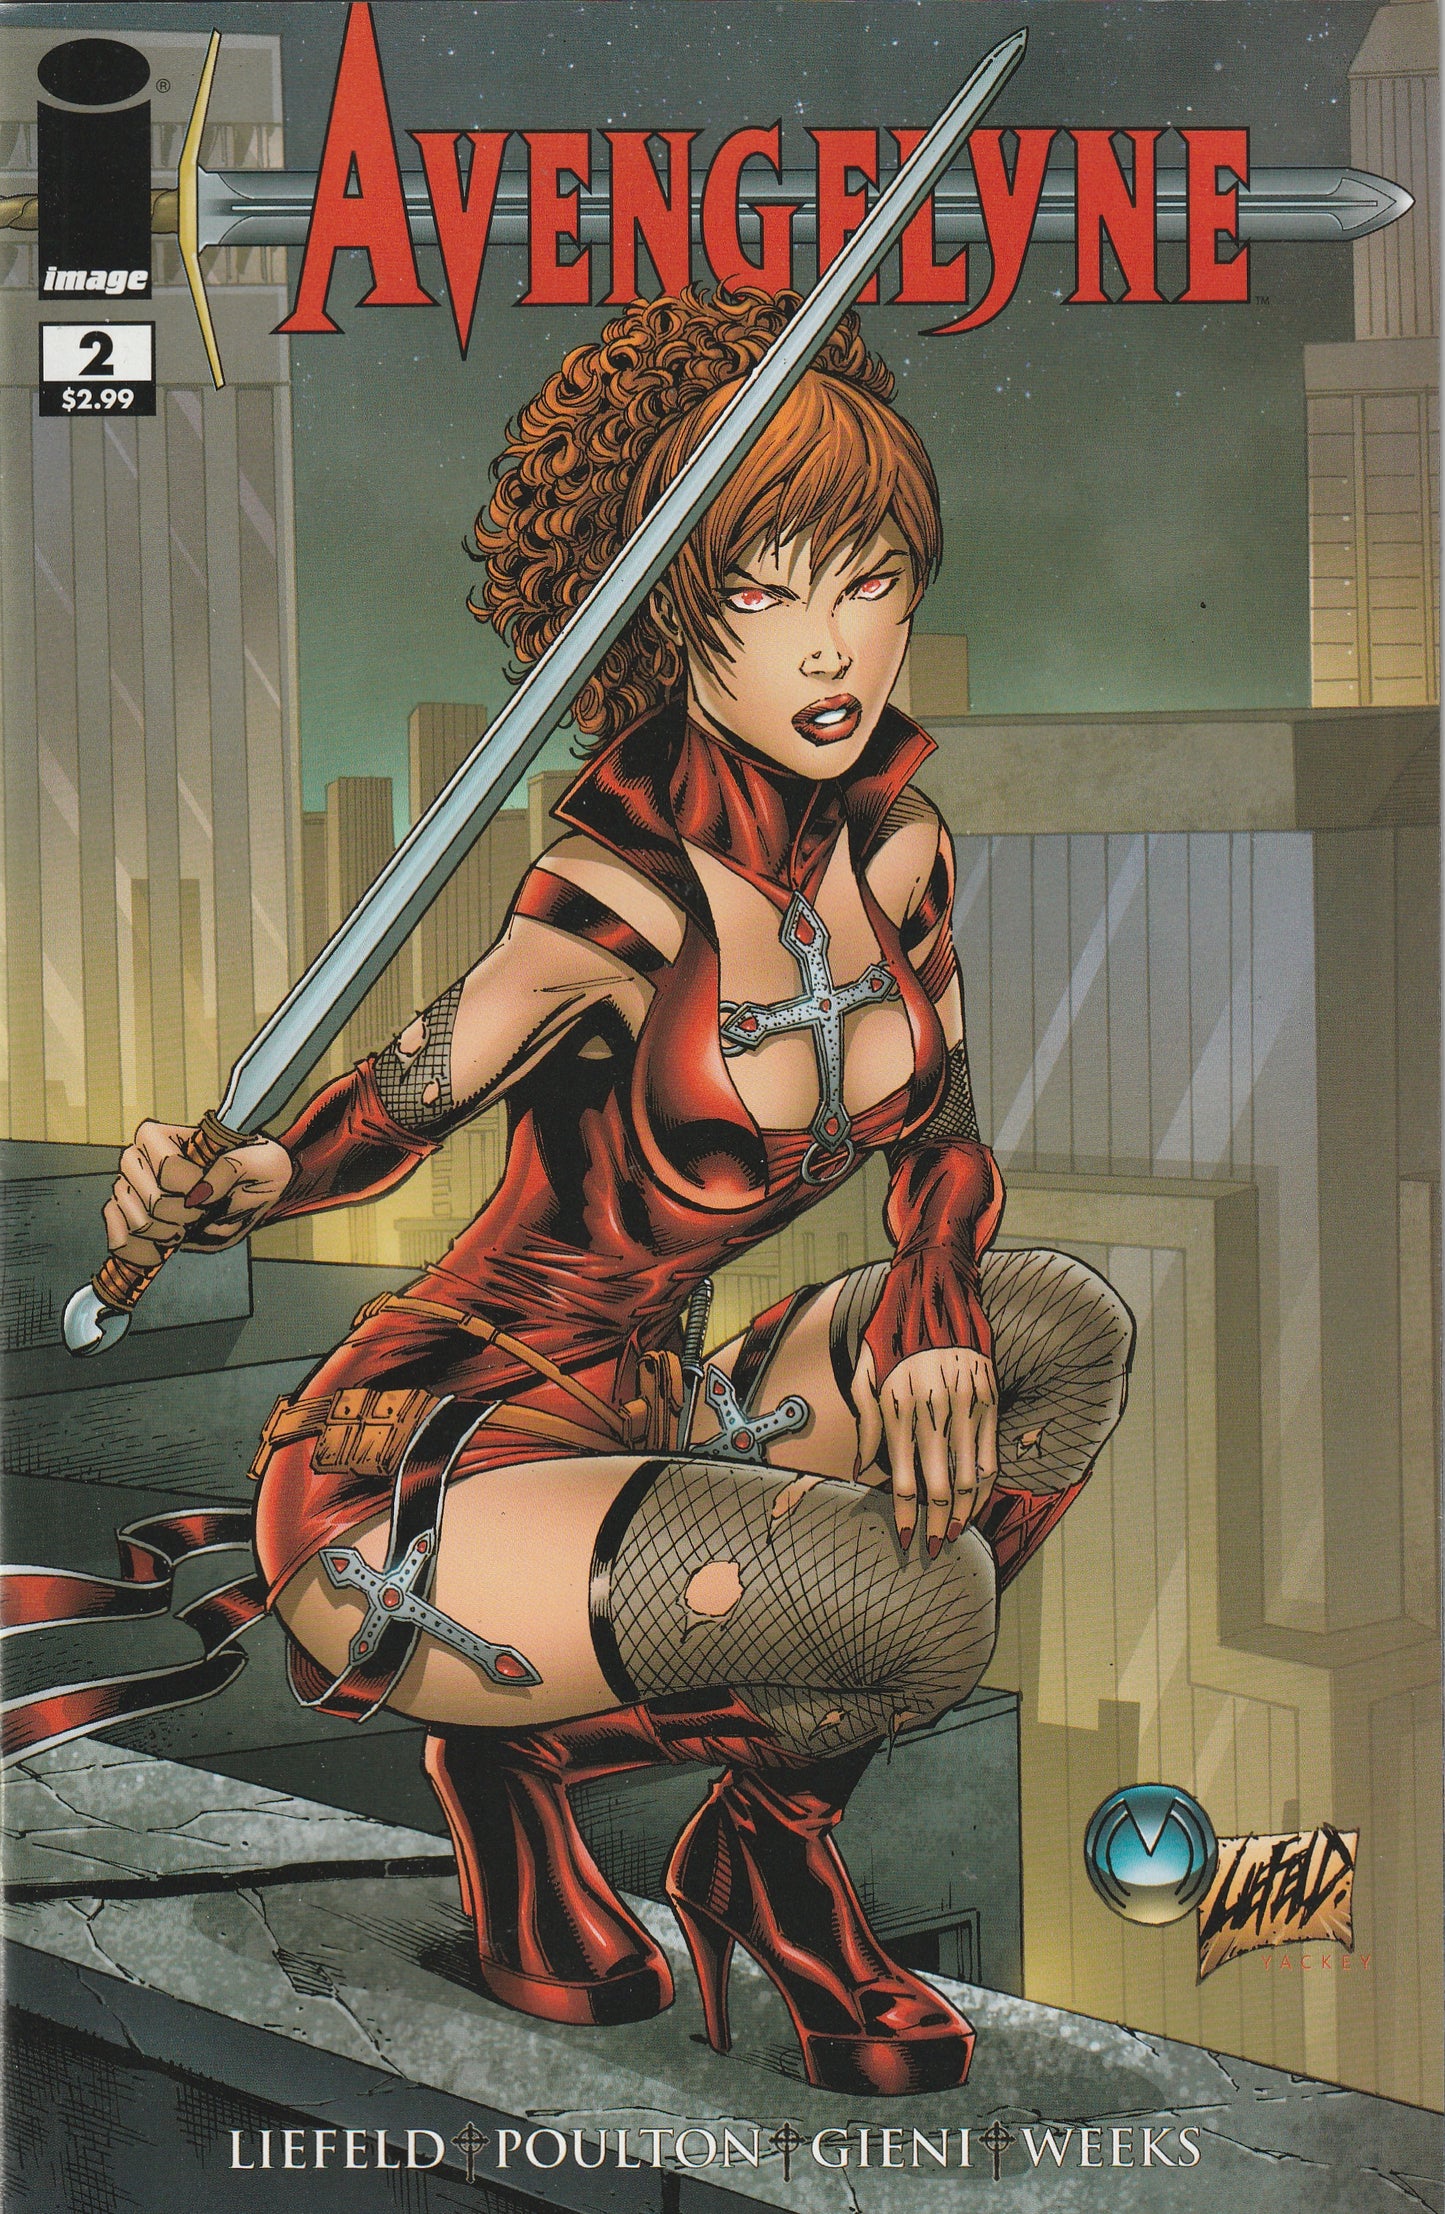 Avengelyne #2 (2011) - Cover A Rob Liefeld